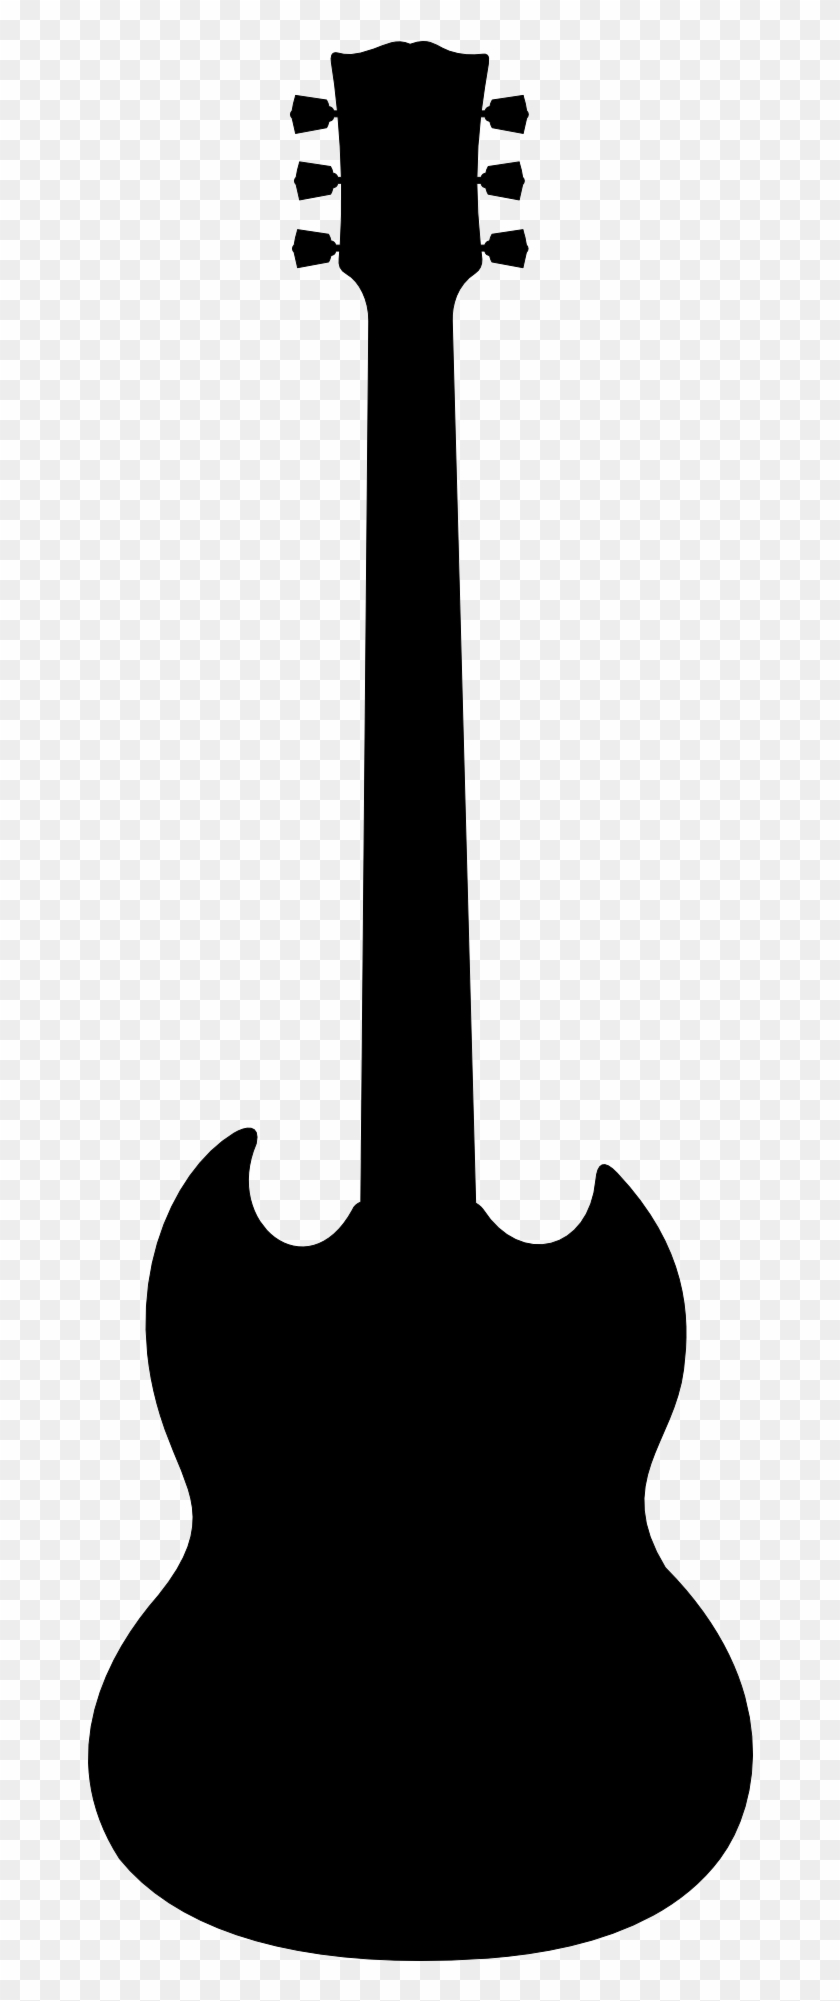 Clipart - Guitar Silhouette Png #183123